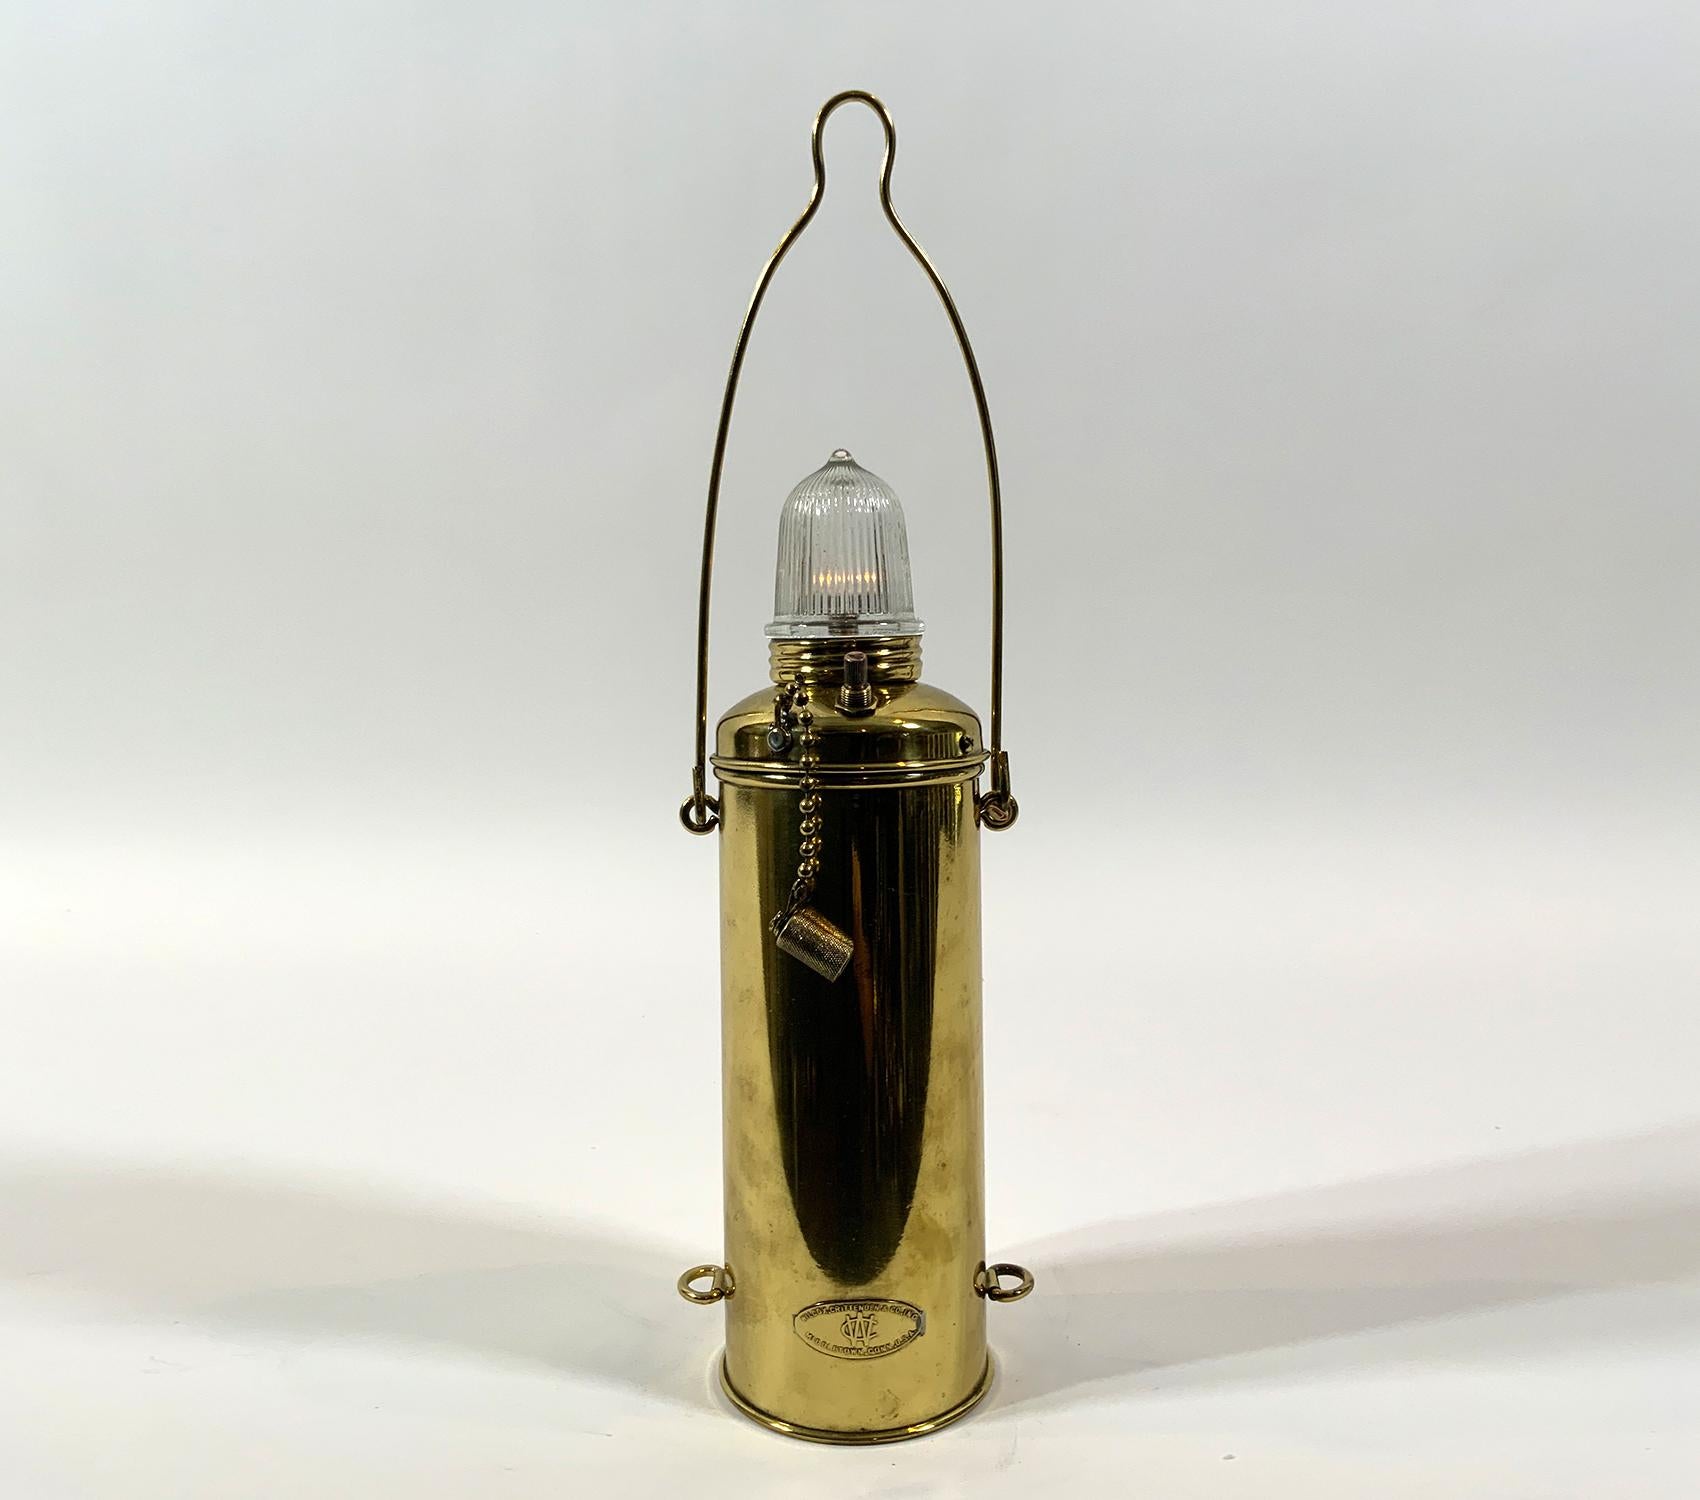 Solid brass marine safety lantern by Wilcox Crittenden of Middletown Connecticut. fine highly polished marine distress lantern with prismatic glass lens and carry handle. With brass makers badge.

Weight: 1 LBS
Overall Dimensions: 12” H x 4